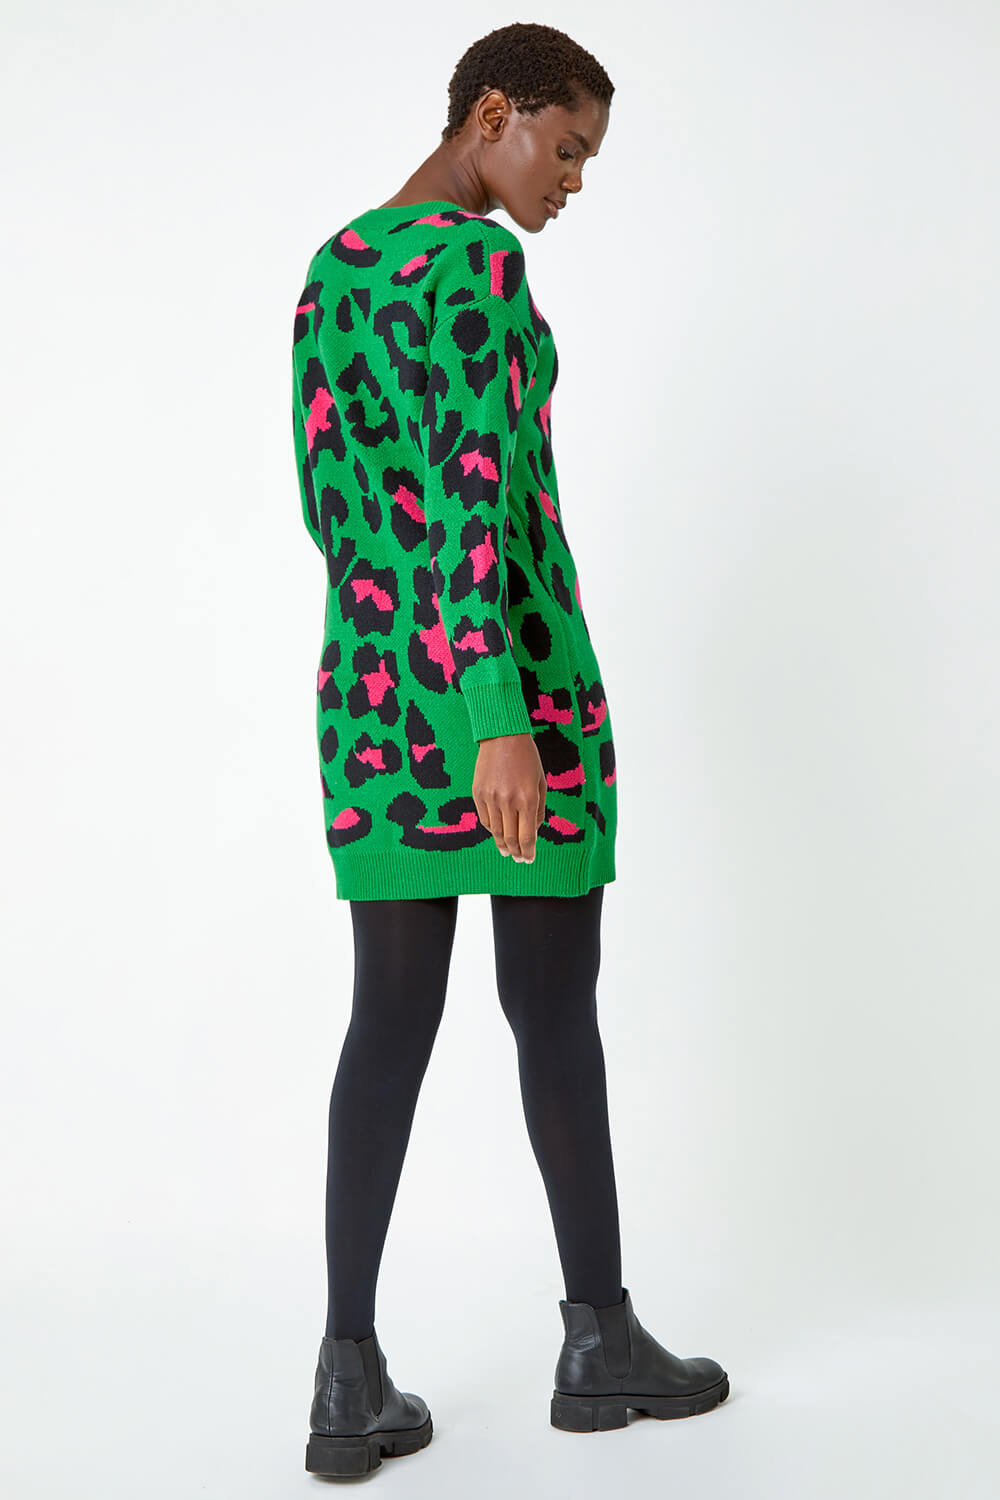 Green Leopard Print Knitted Jumper Dress, Image 3 of 5